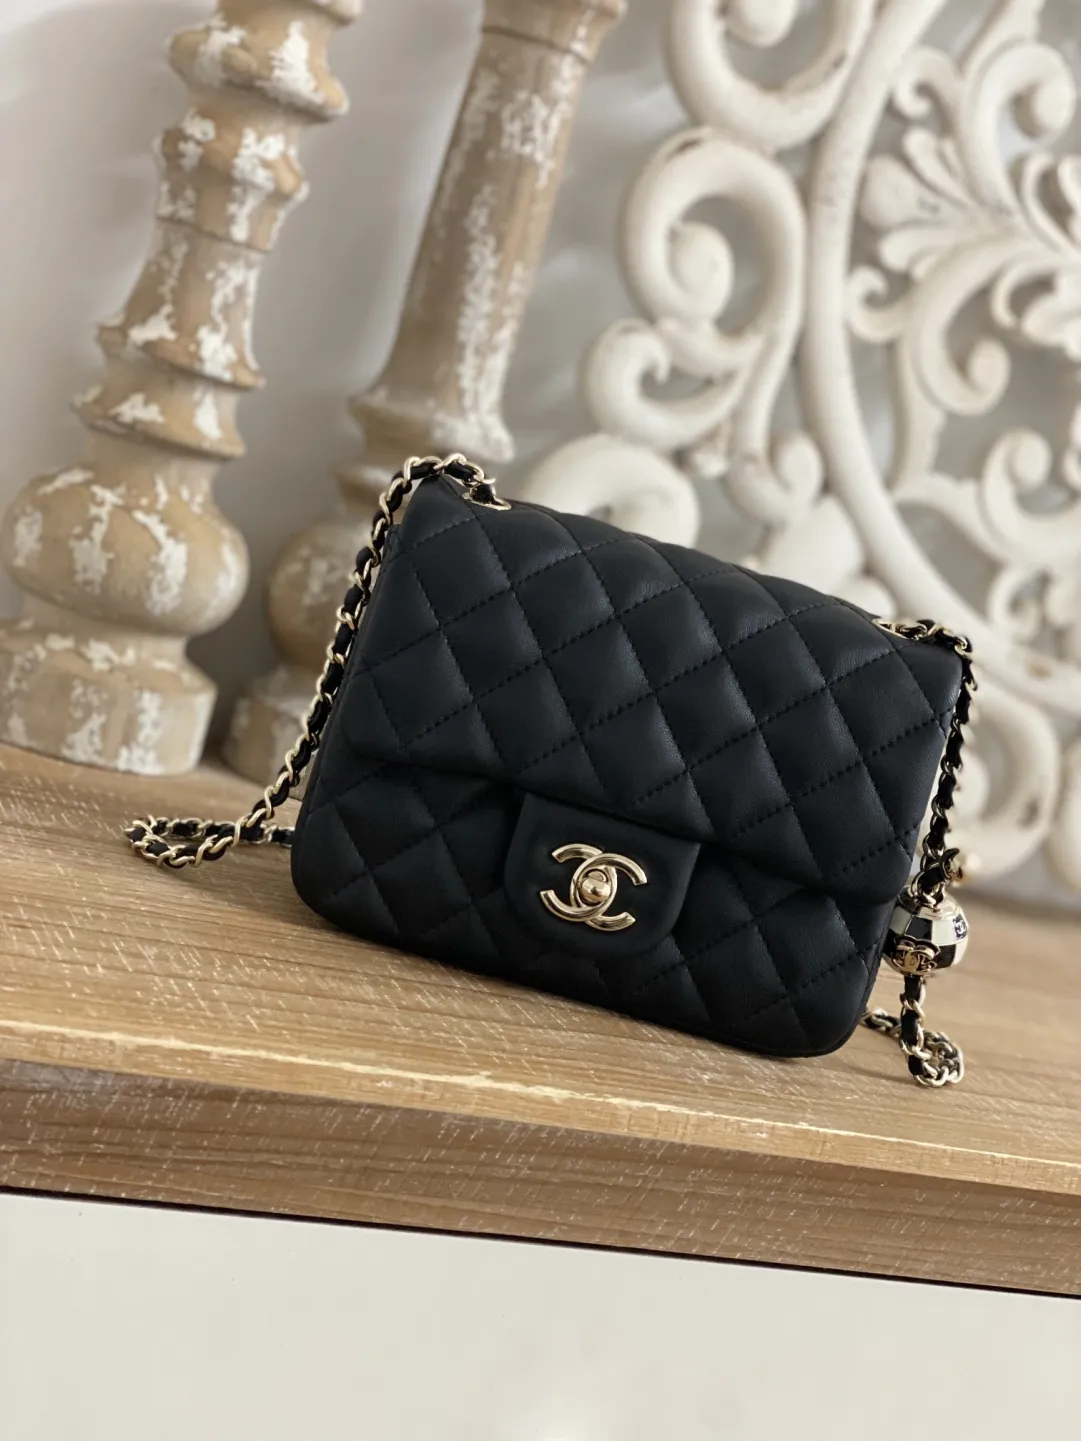 Top Chanel replicas - Affordable Luxury Inspired Handbags